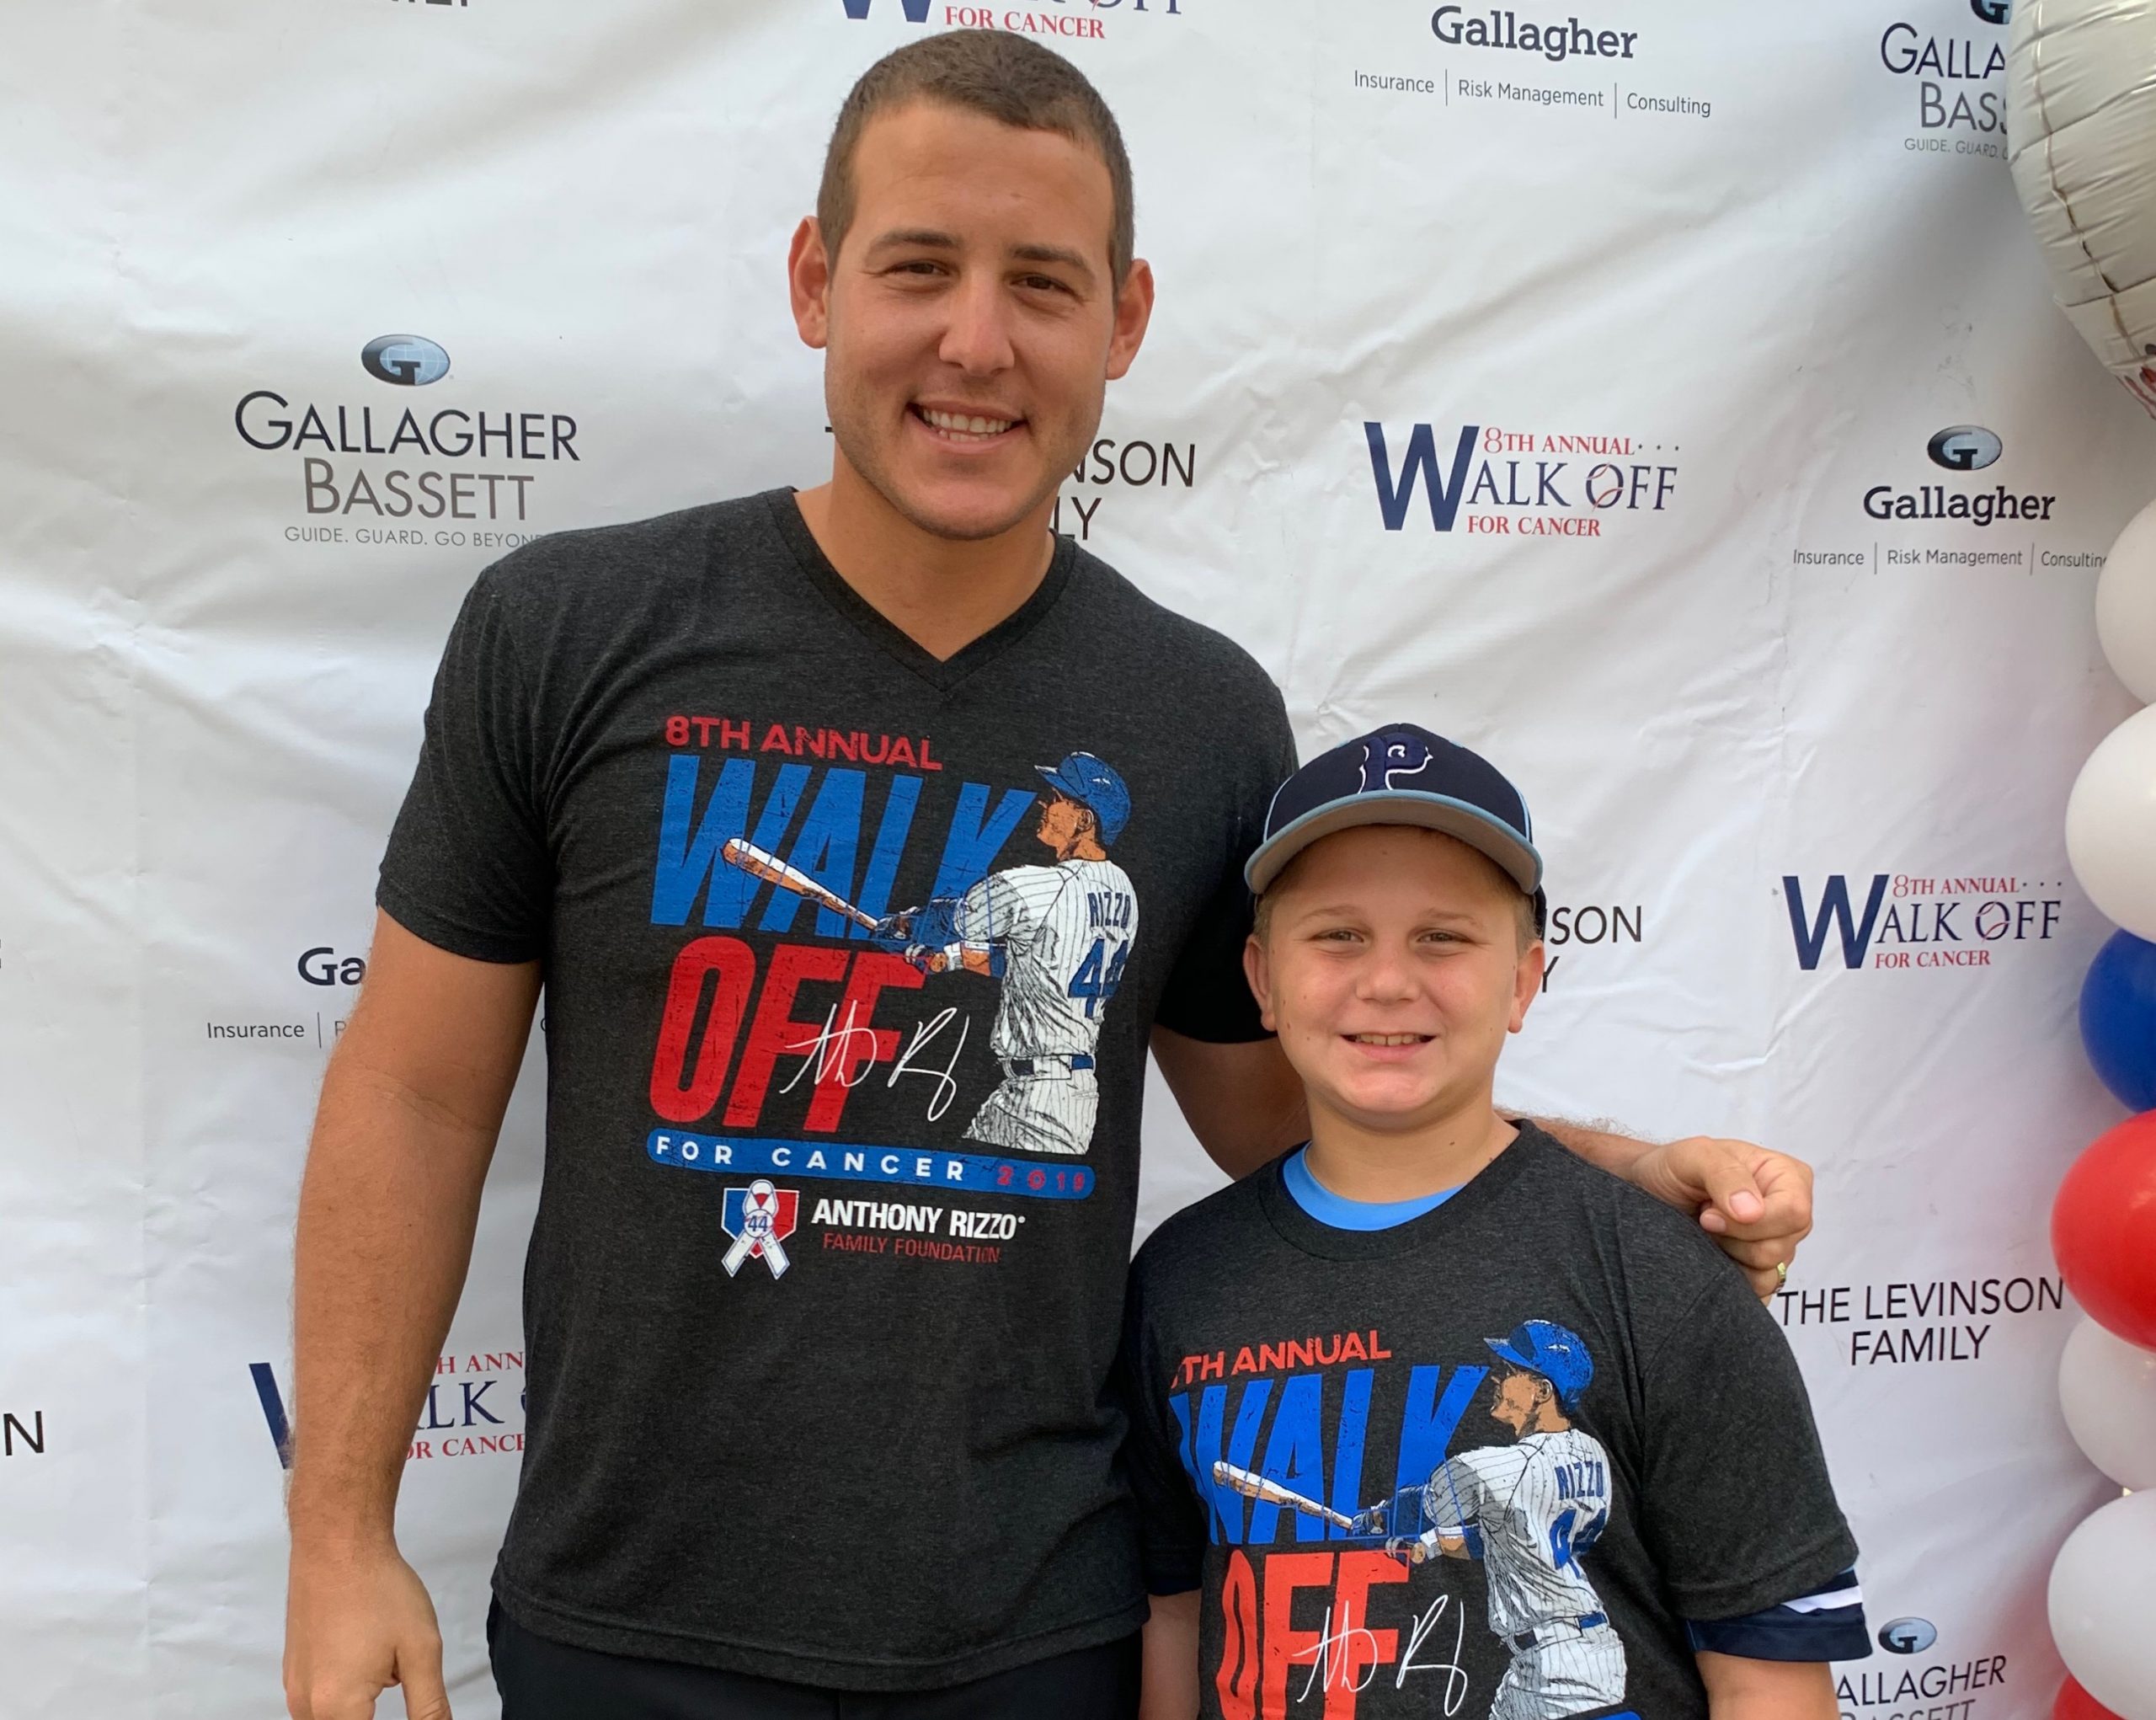 Anthony Rizzo's hosts his 8th Annual Walk-off for Cancer – Eagle Eye News